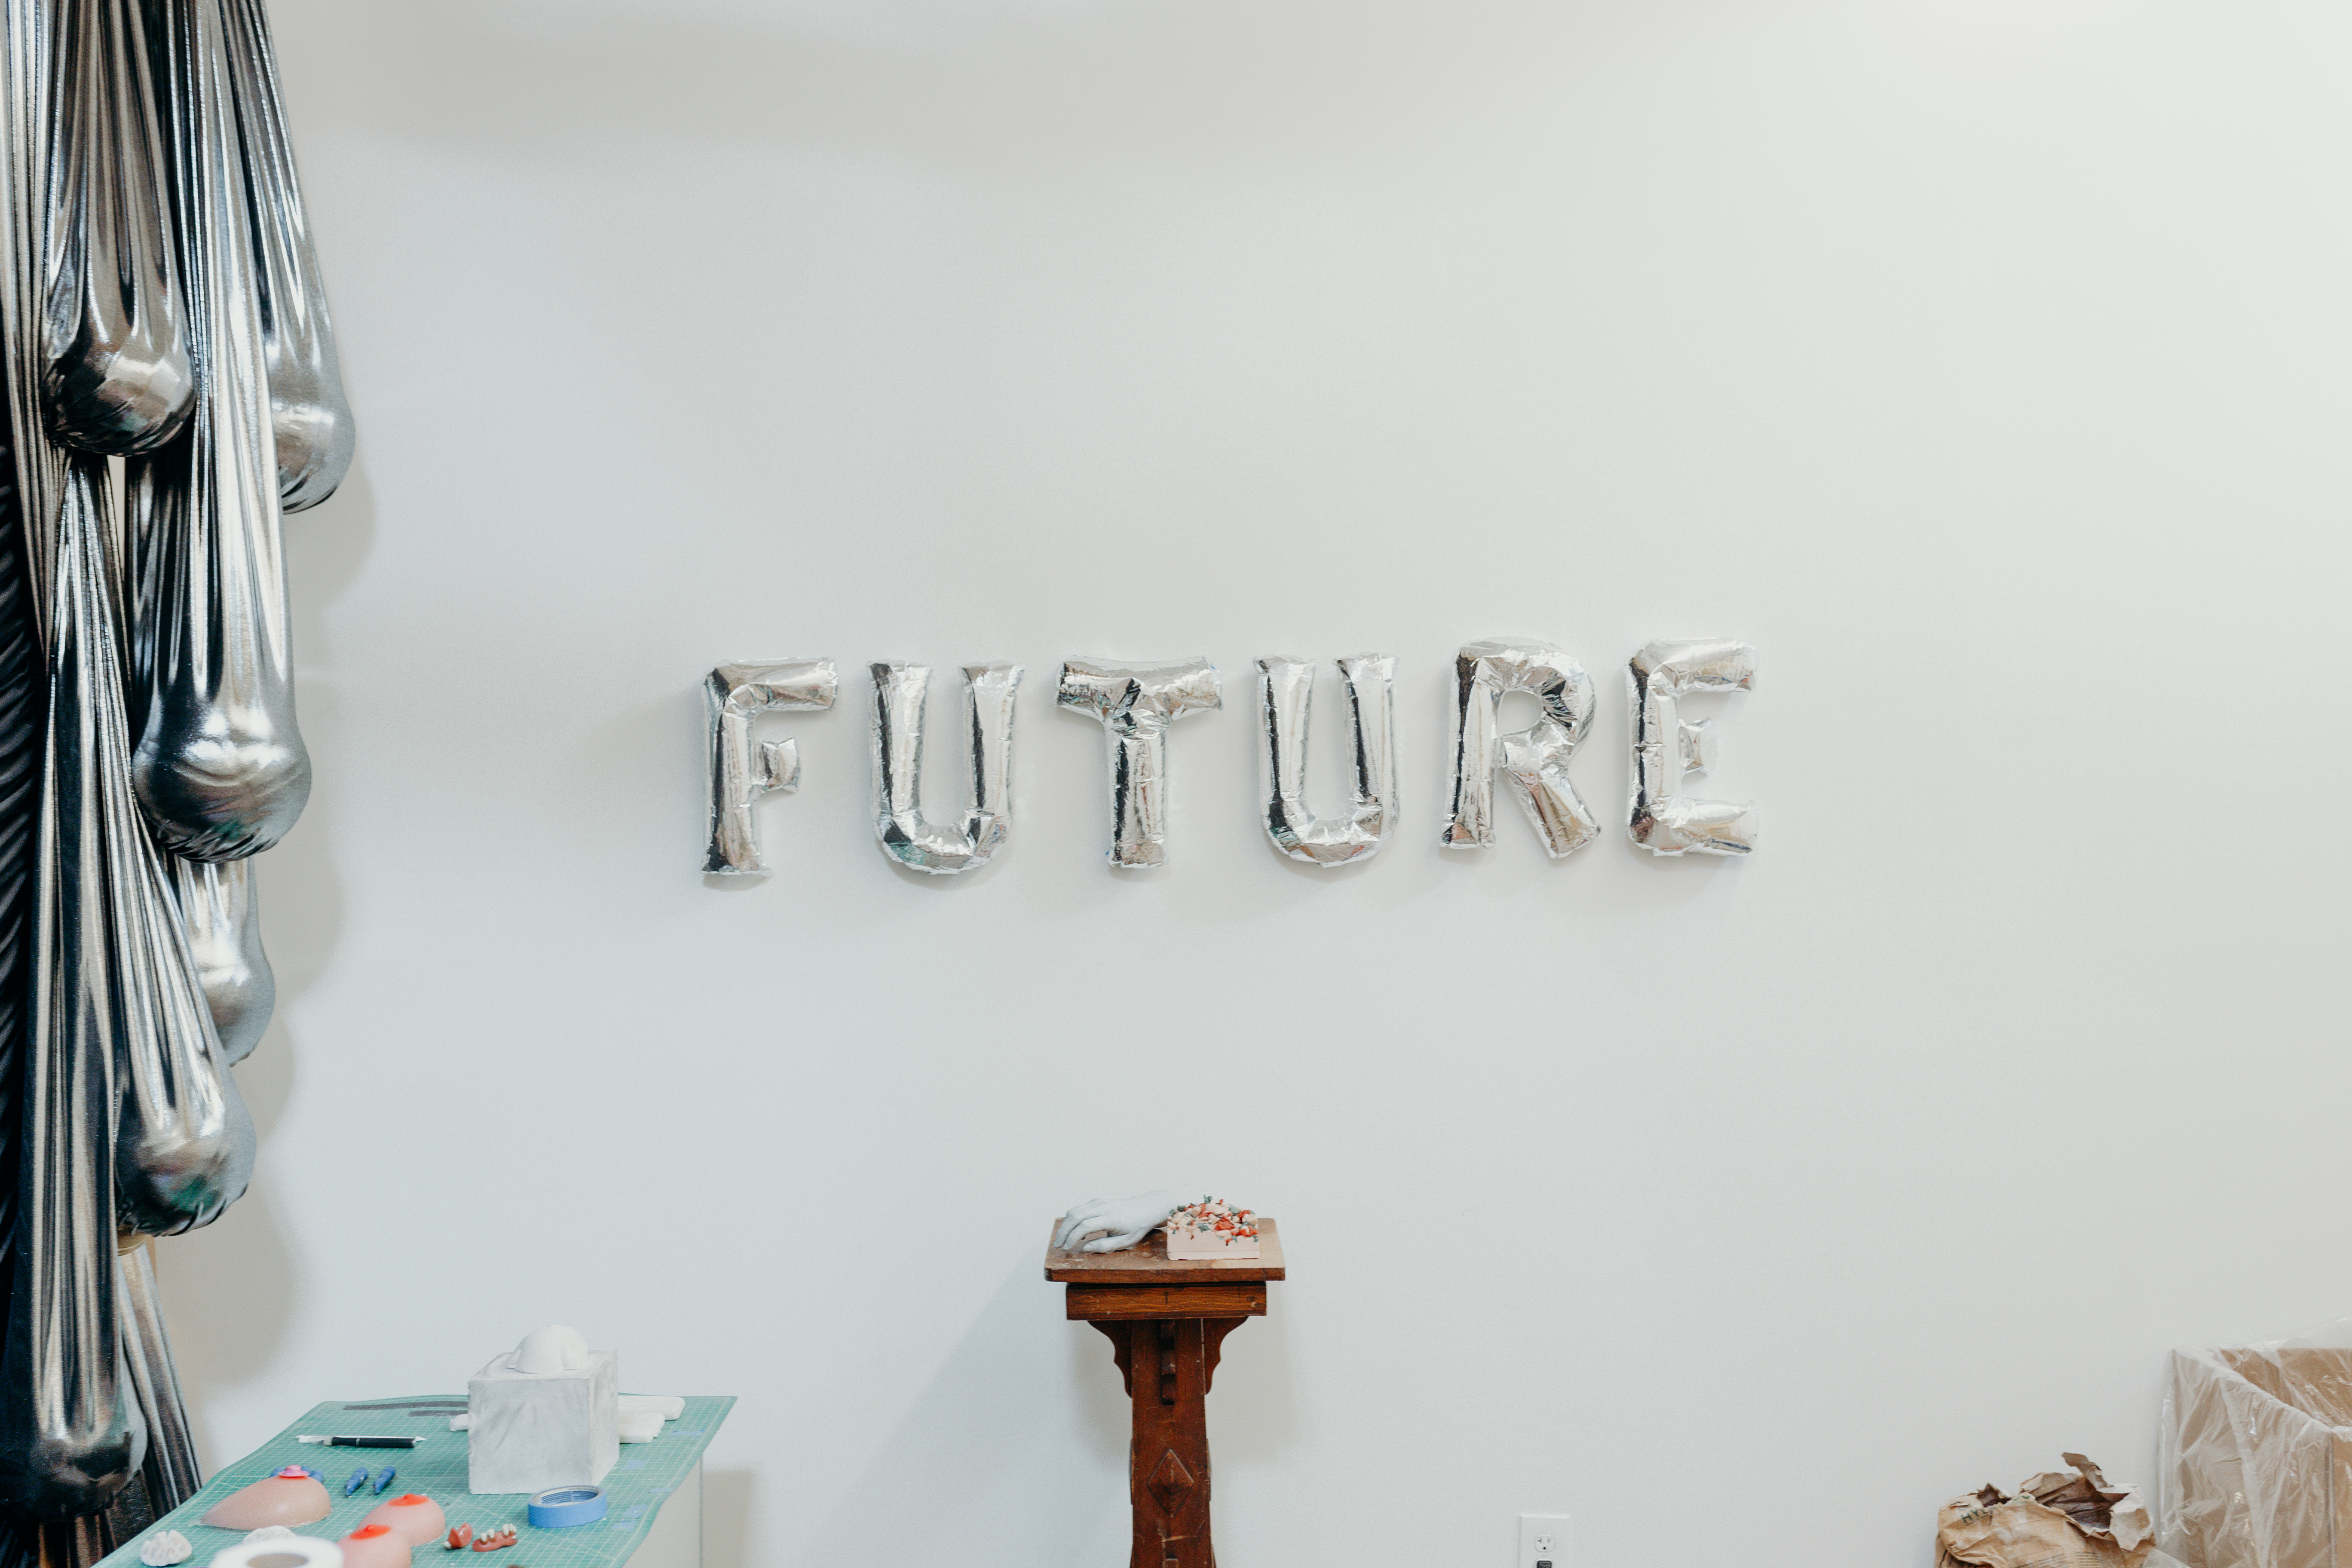 The word FUTURE is spelled out on the wall from balloons. 